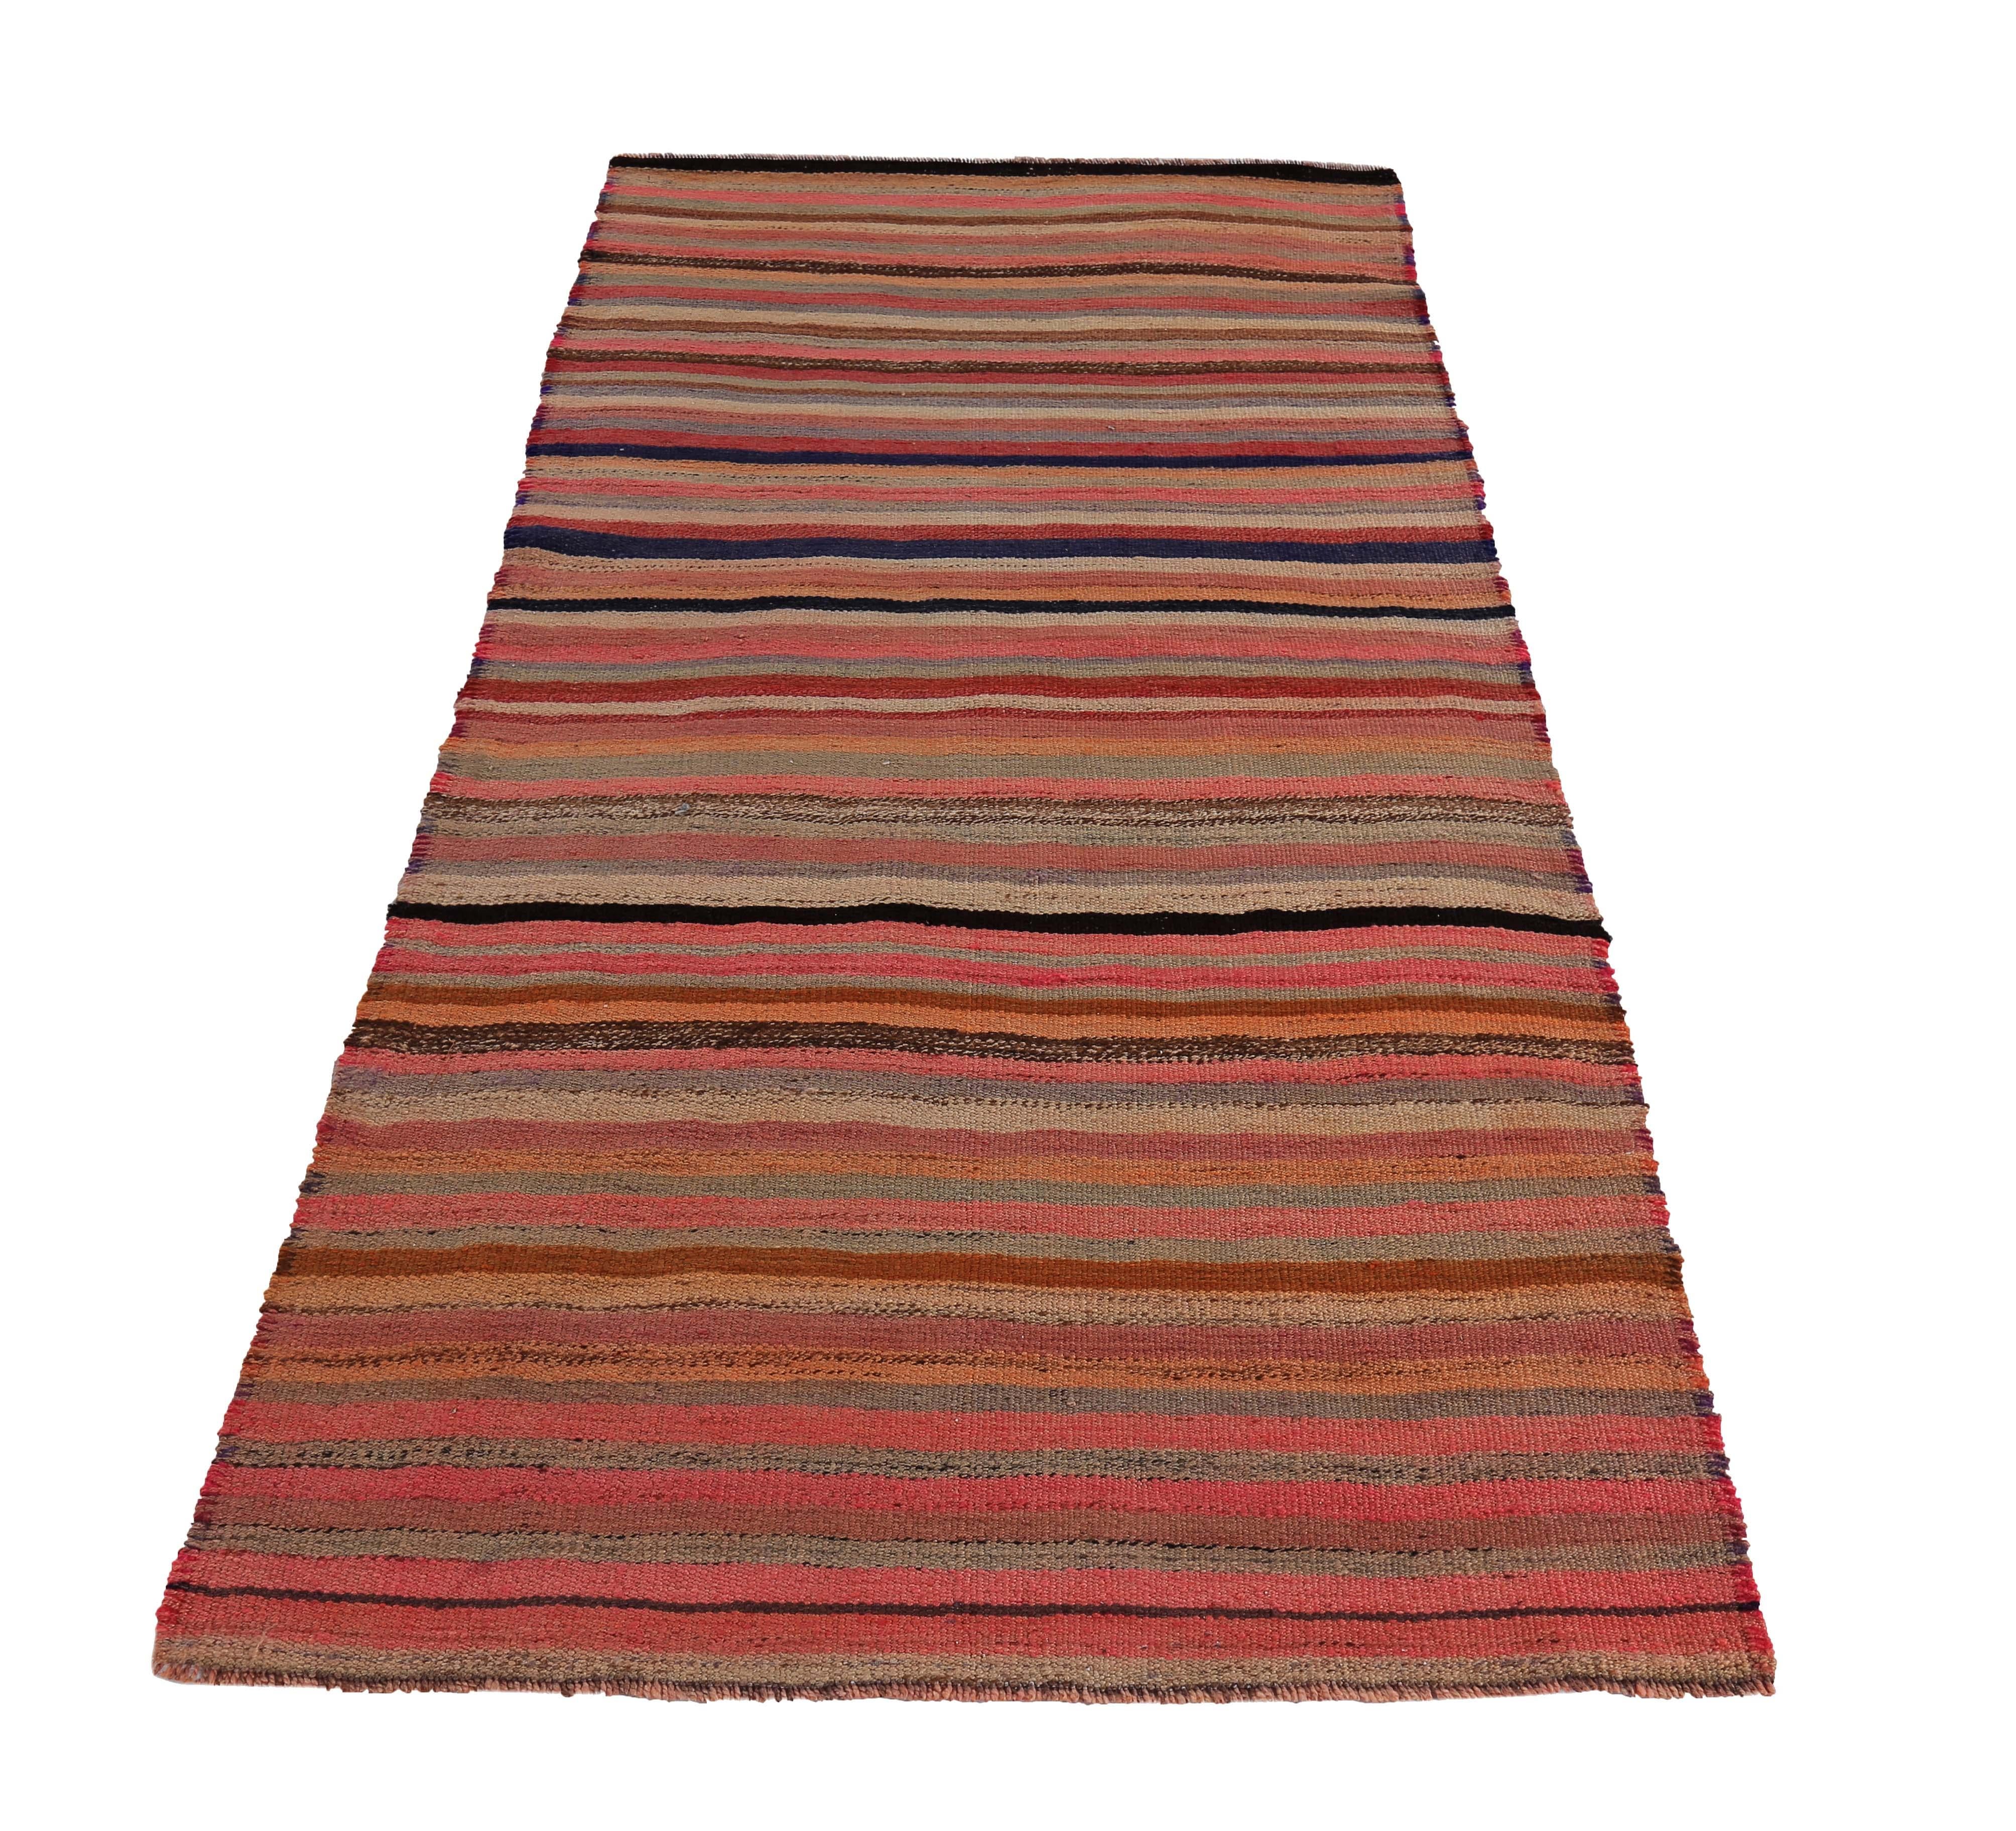 Turkish runner rug handwoven from the finest sheep’s wool and colored with all-natural vegetable dyes that are safe for humans and pets. It’s a traditional Kilim flat-weave design featuring red, orange and pink stripe patterns. It’s a stunning piece